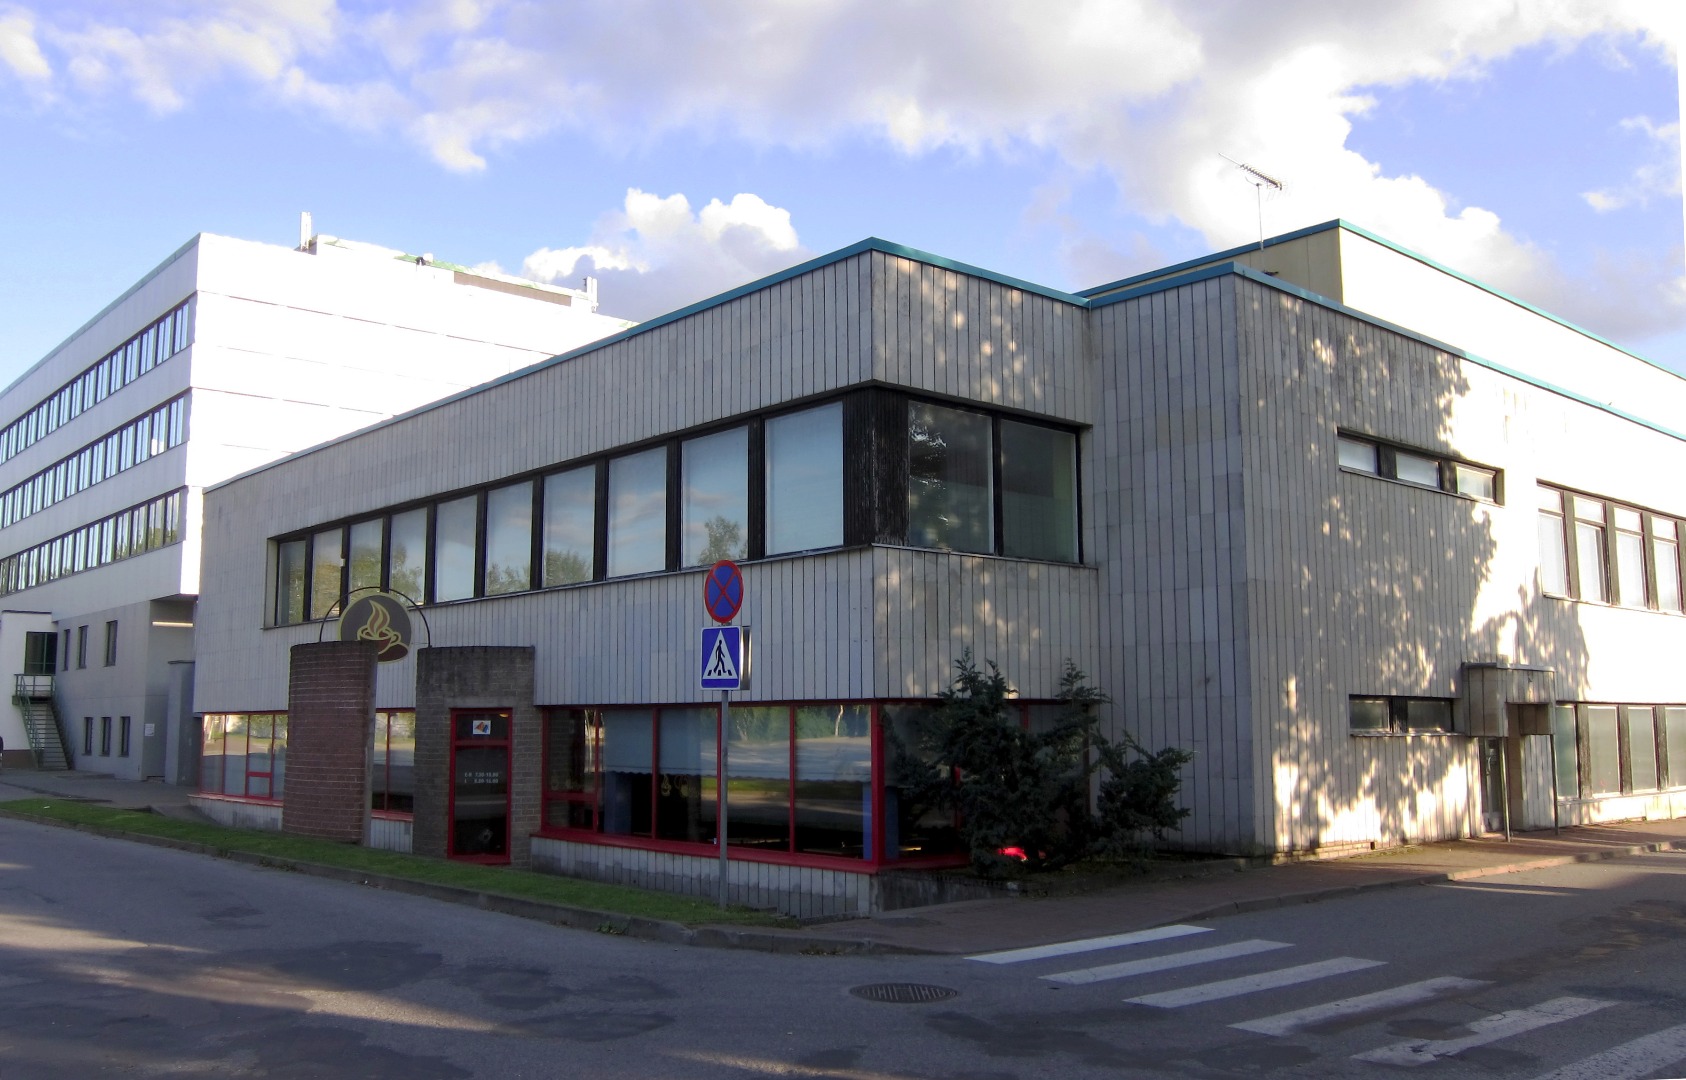 Administrative building in Raplas, view of the building. Architect Helgi Margna; engineer m. Volmer rephoto